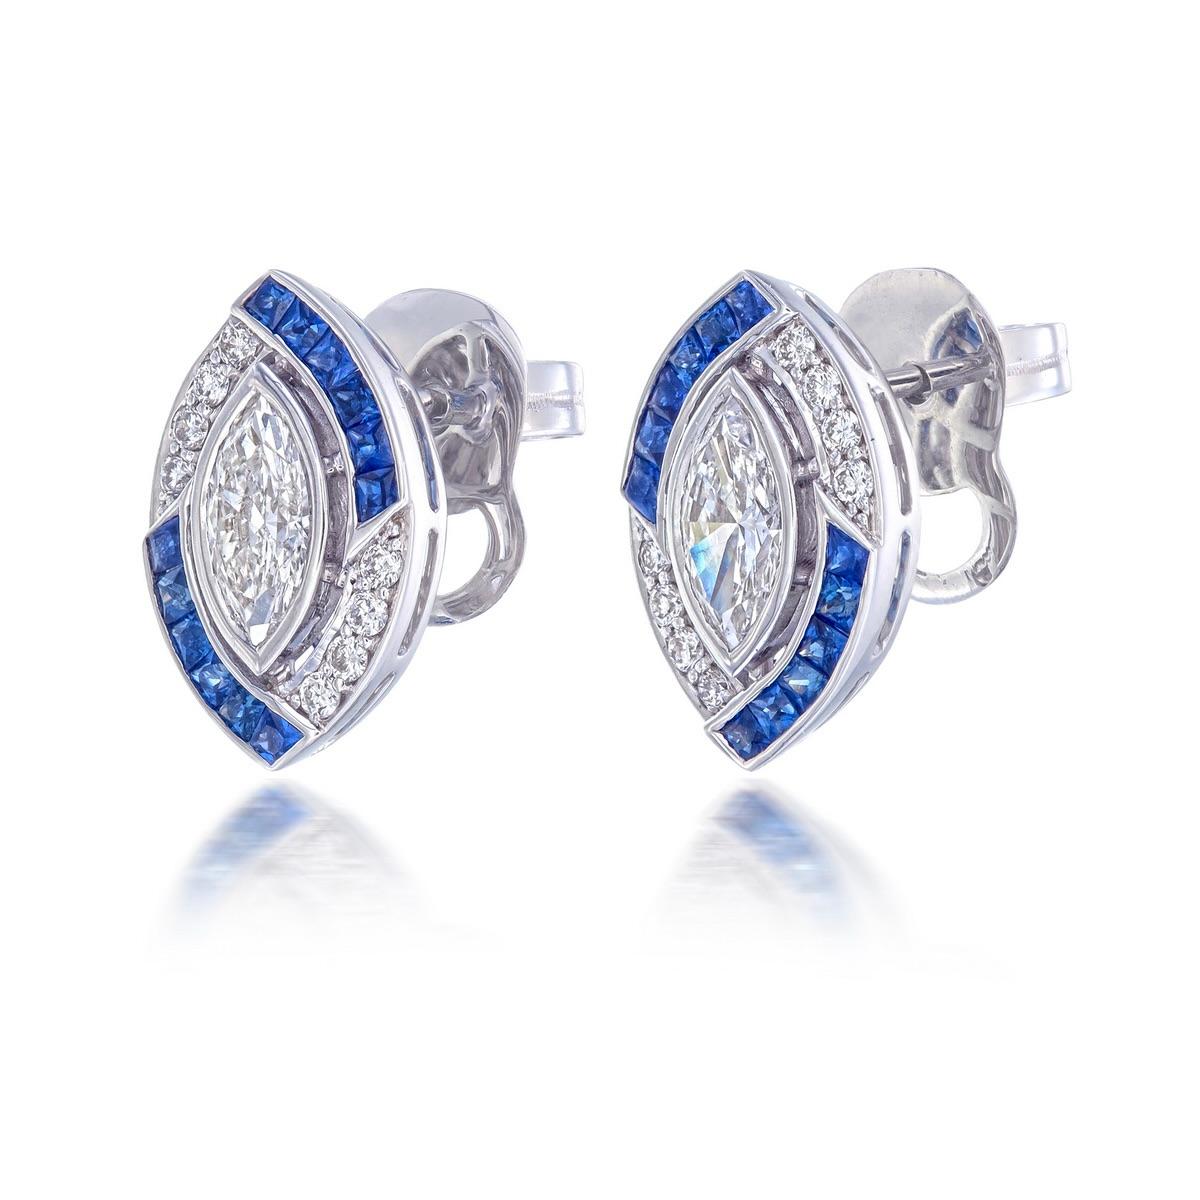 Marquise Cut 1.31 Carat Diamond and Blue Sapphire Earrings in 18k White Gold For Sale